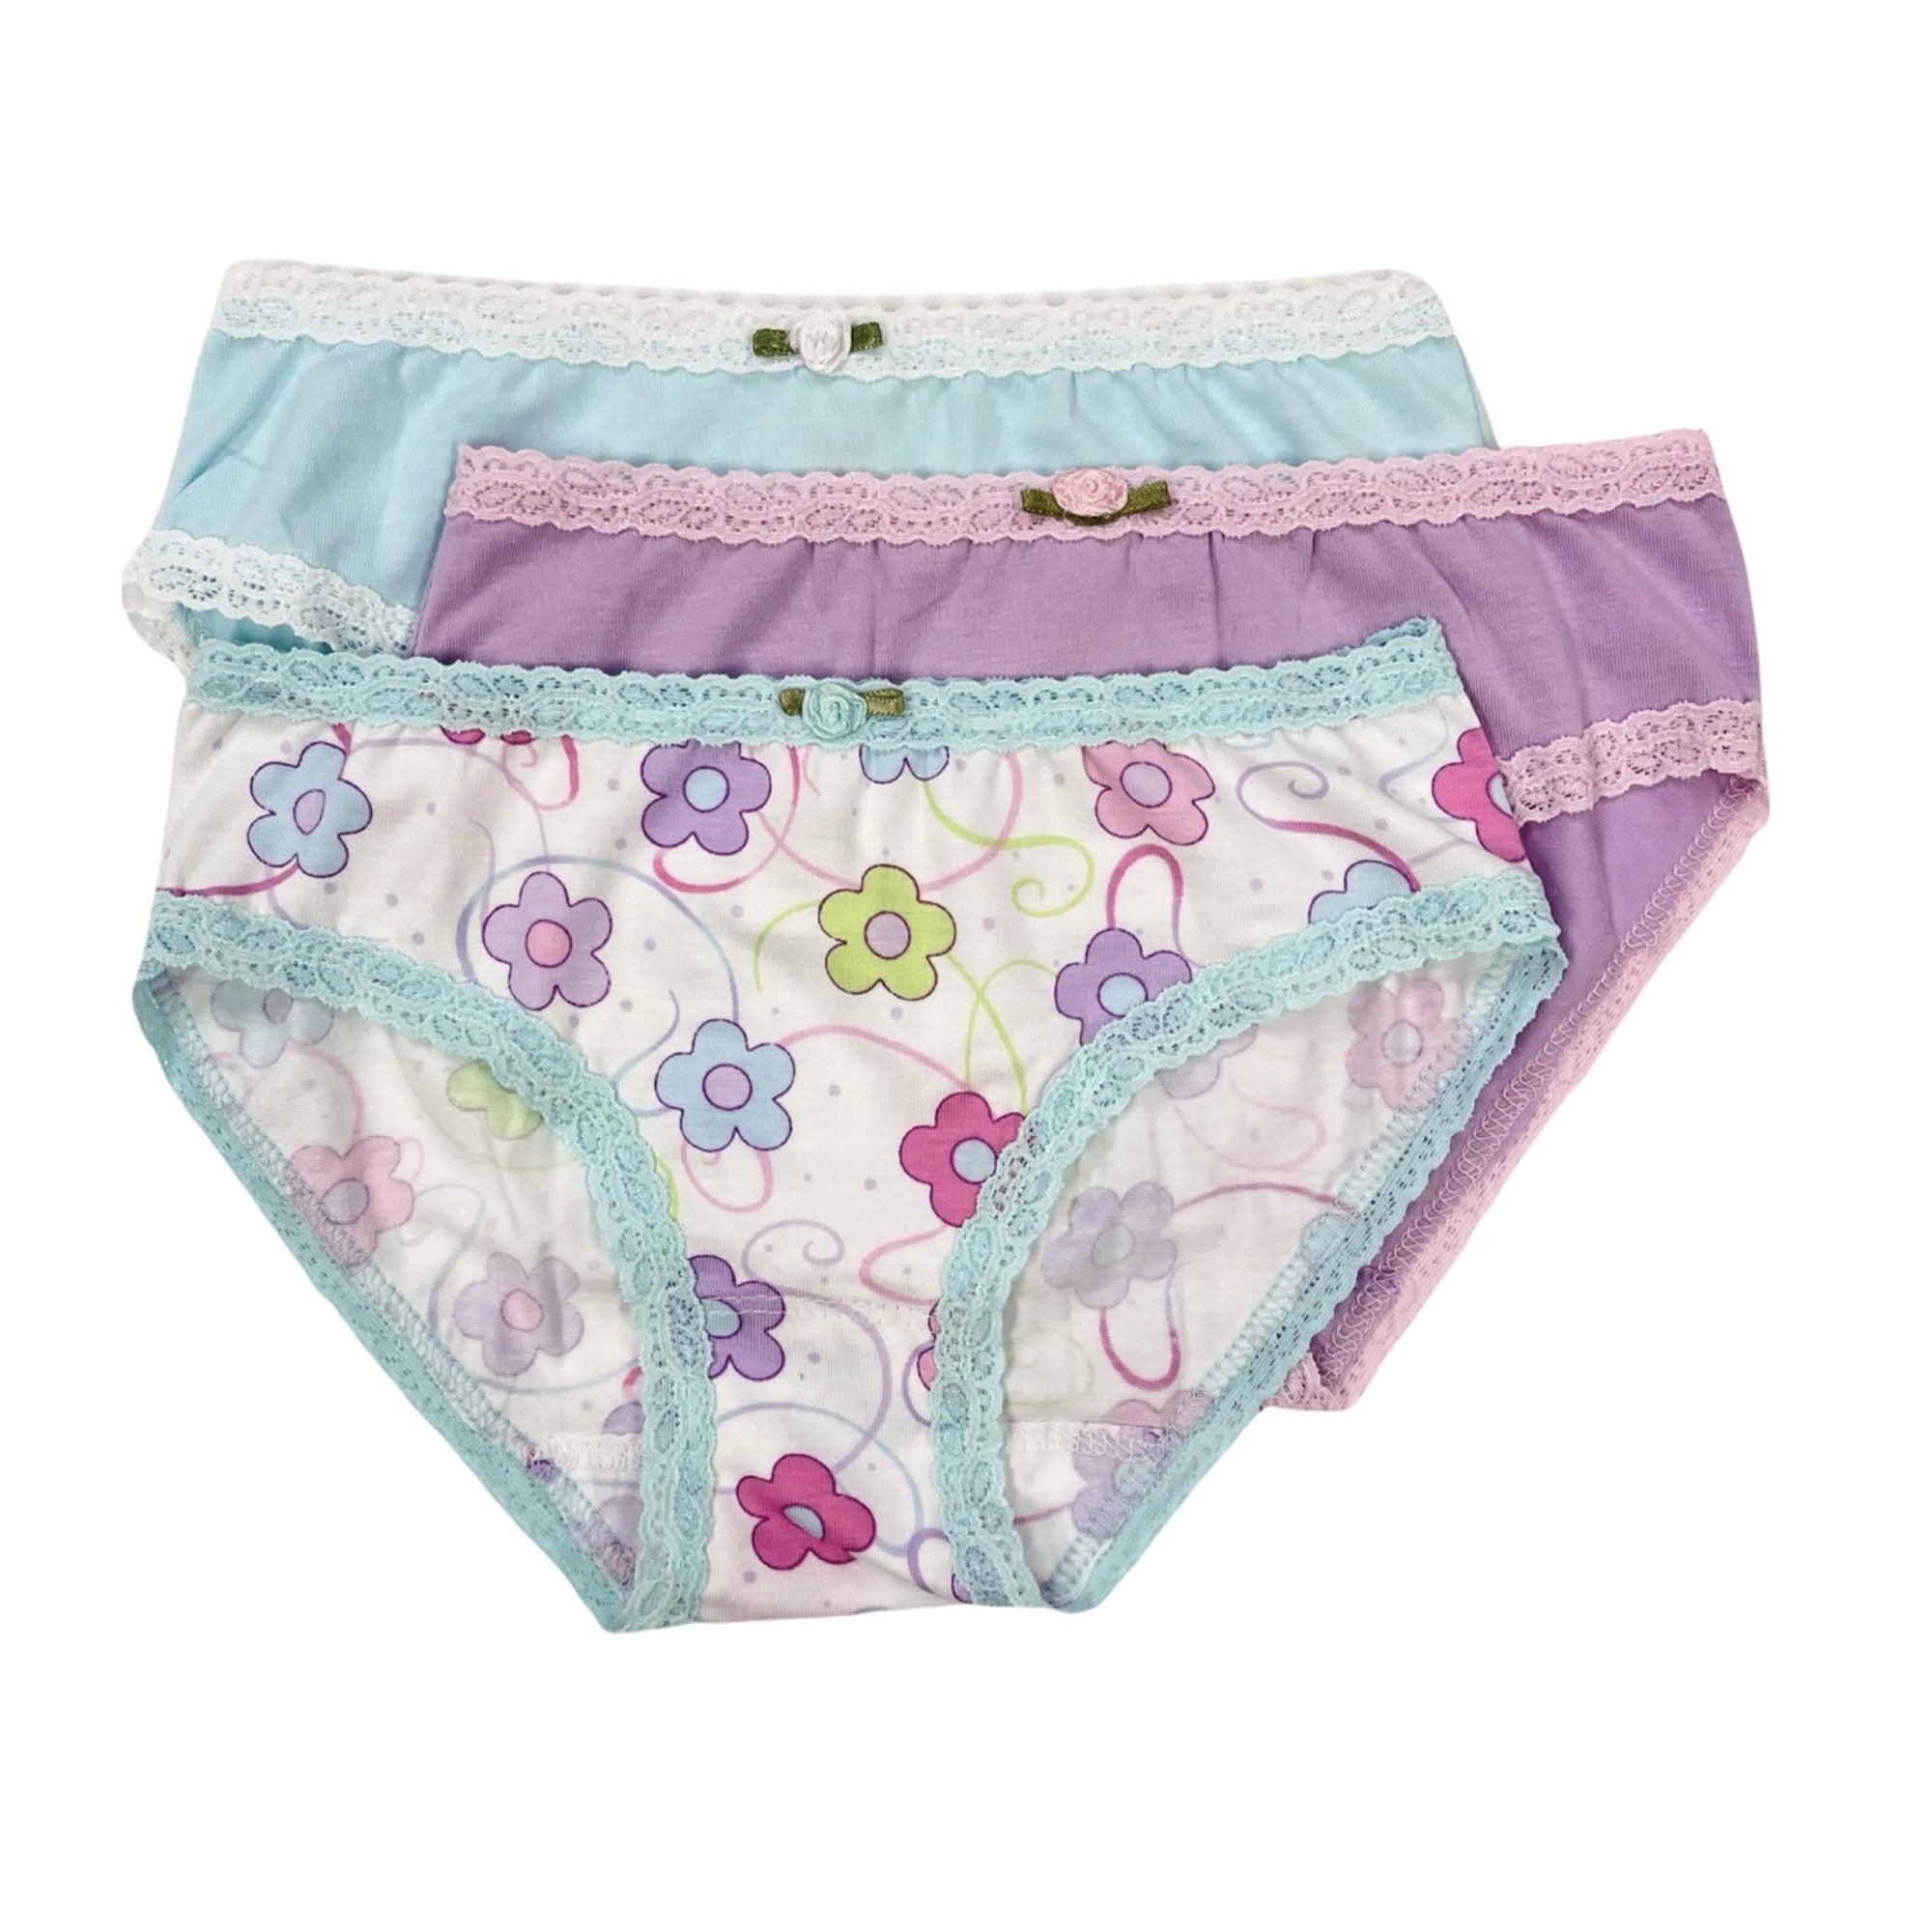 Little Fairy Lace Underwear packs – YouthBaee